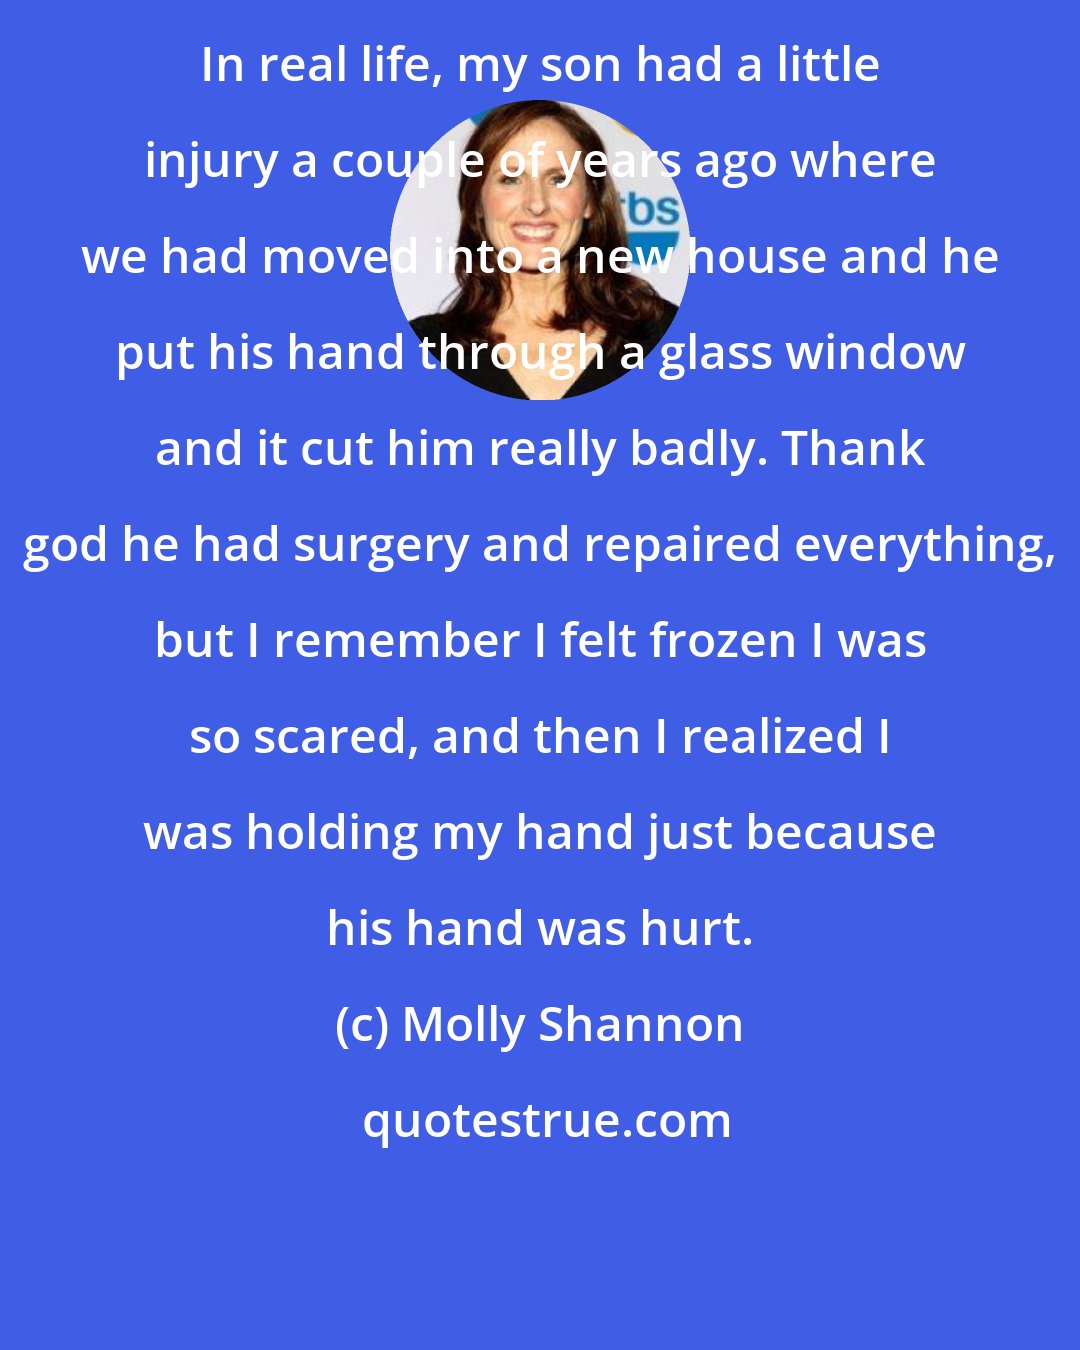 Molly Shannon: In real life, my son had a little injury a couple of years ago where we had moved into a new house and he put his hand through a glass window and it cut him really badly. Thank god he had surgery and repaired everything, but I remember I felt frozen I was so scared, and then I realized I was holding my hand just because his hand was hurt.